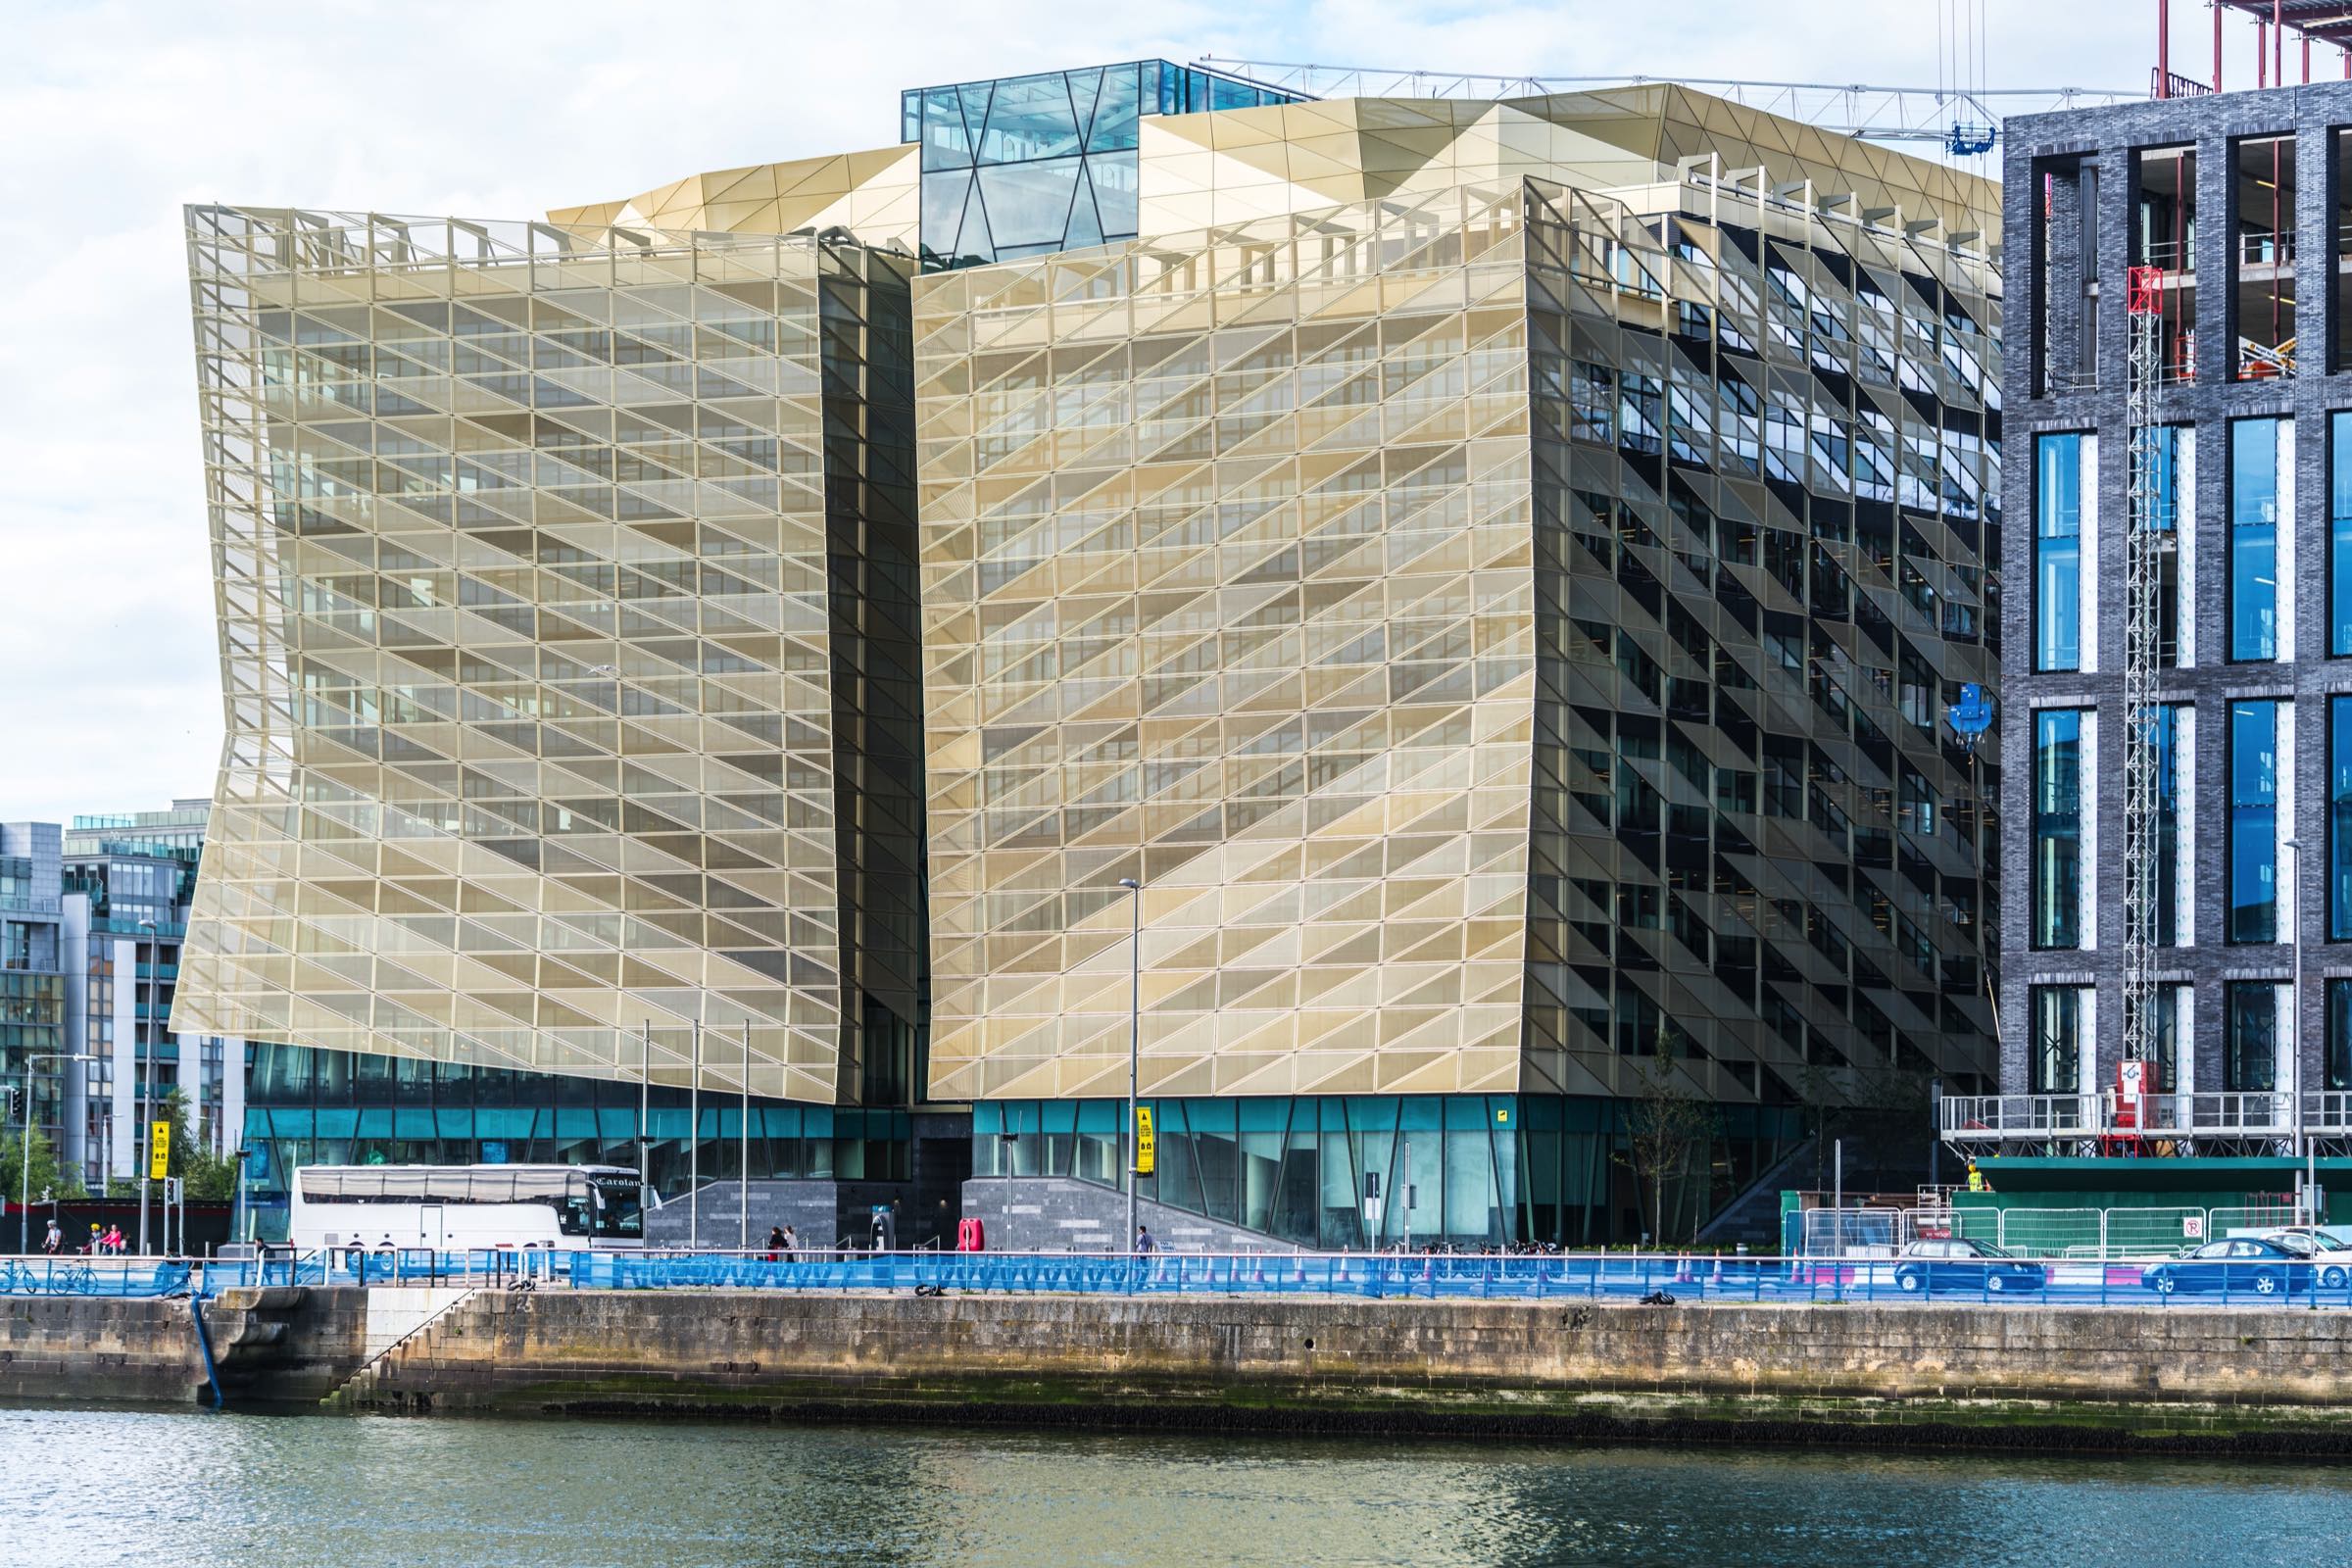 NEW CENTRAL BANK OF IRELAND HQ